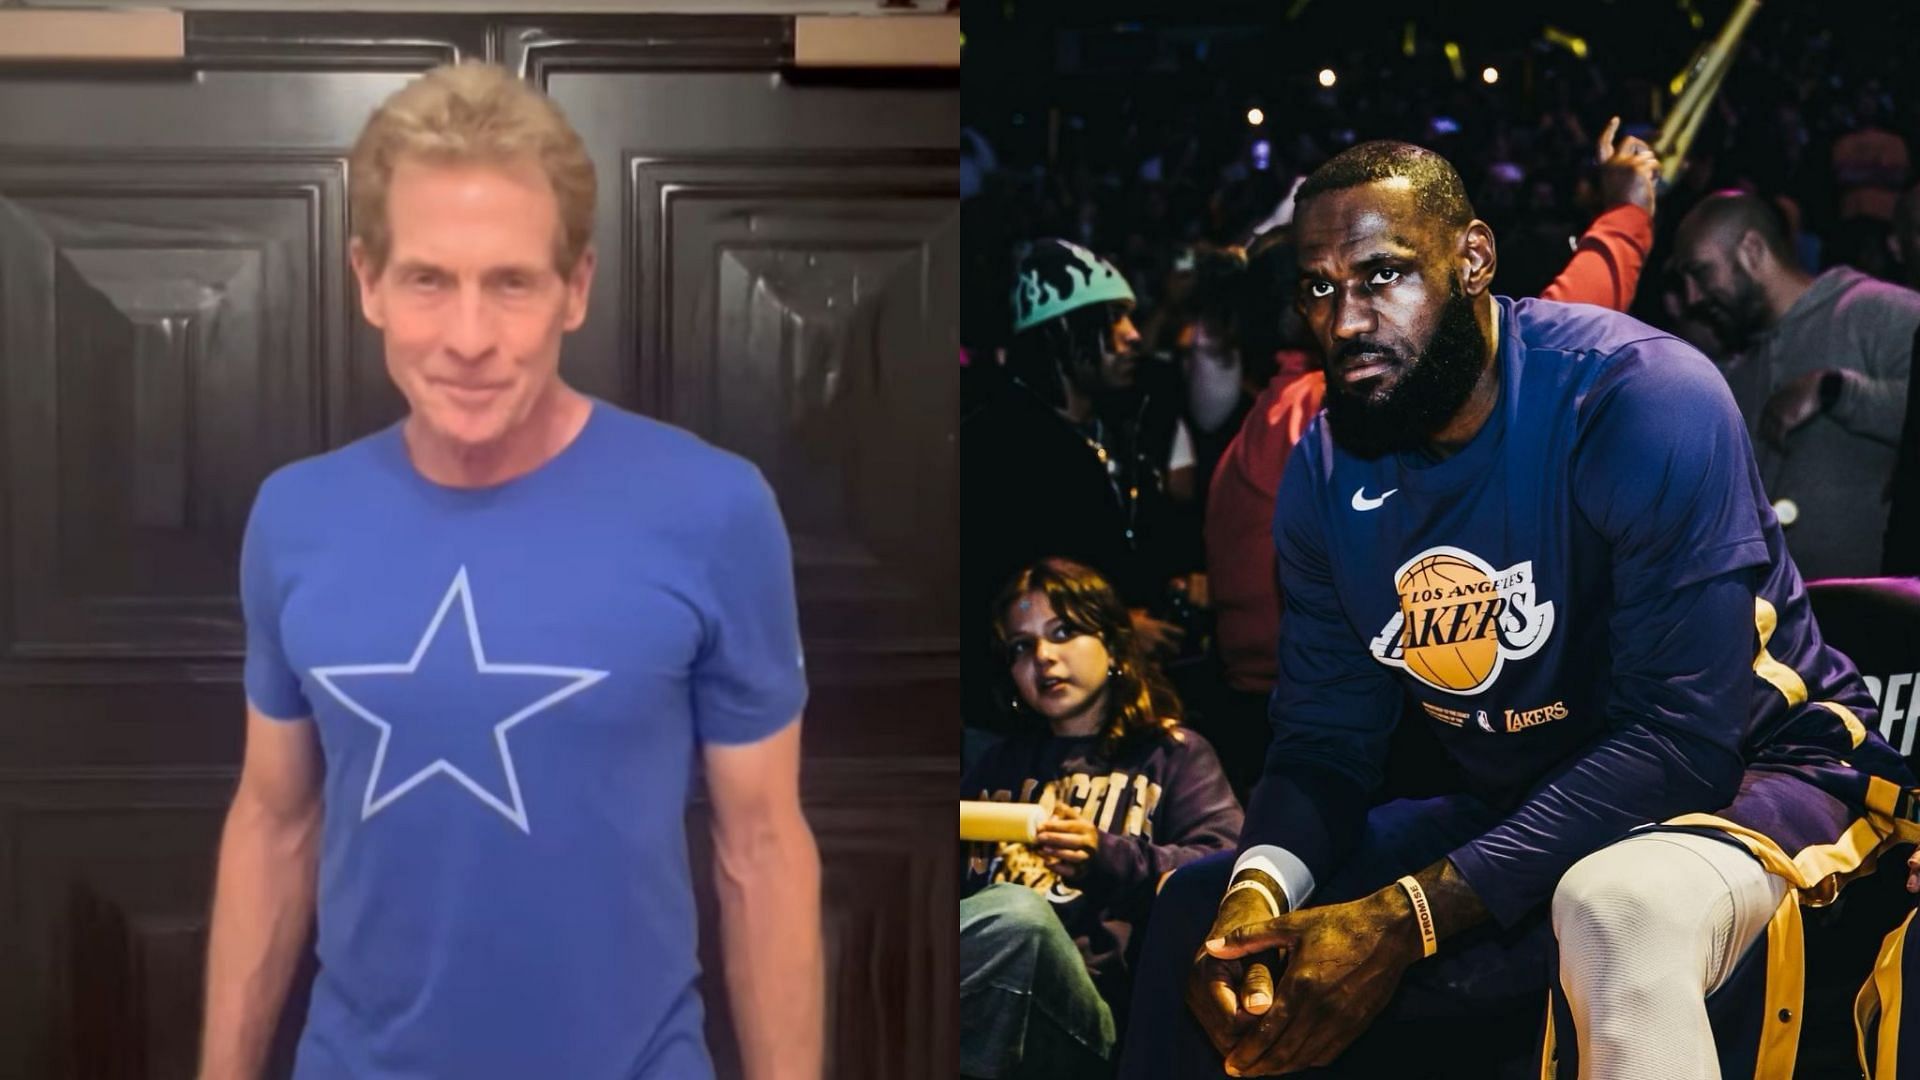 Skip Bayless sounds off on Cowboys fan LeBron James for supporting Browns